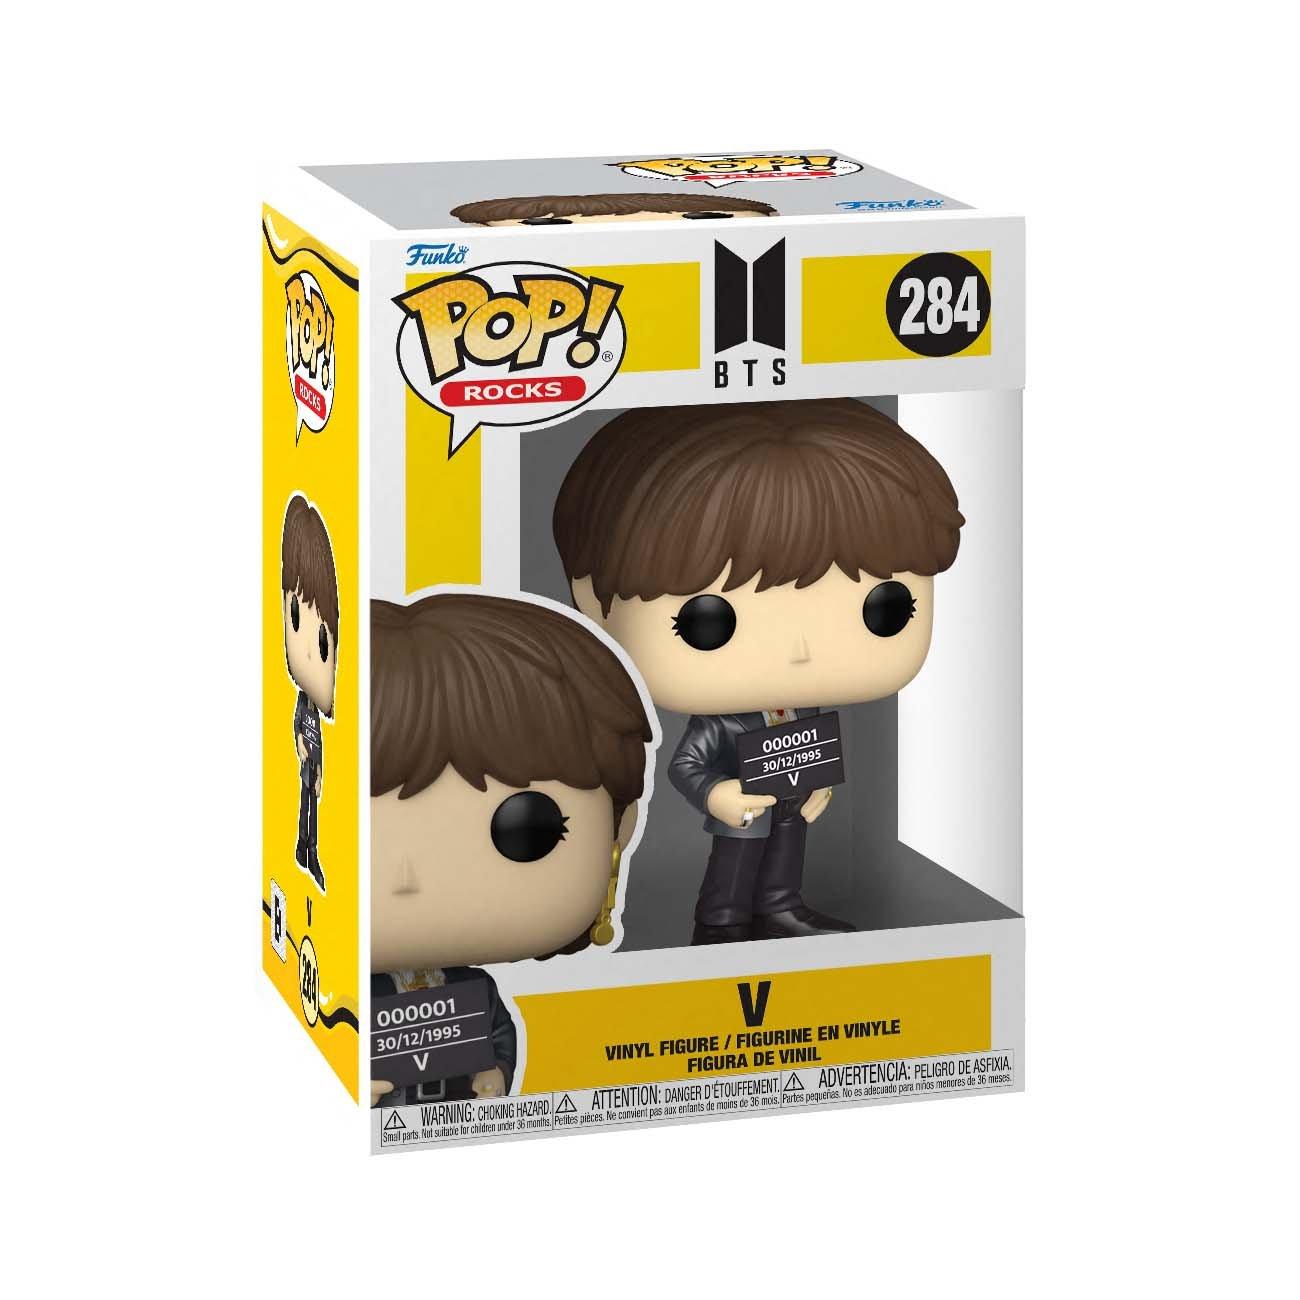 Funko on X: Here is a closer look at the BTS Pop! Keychains. Pre